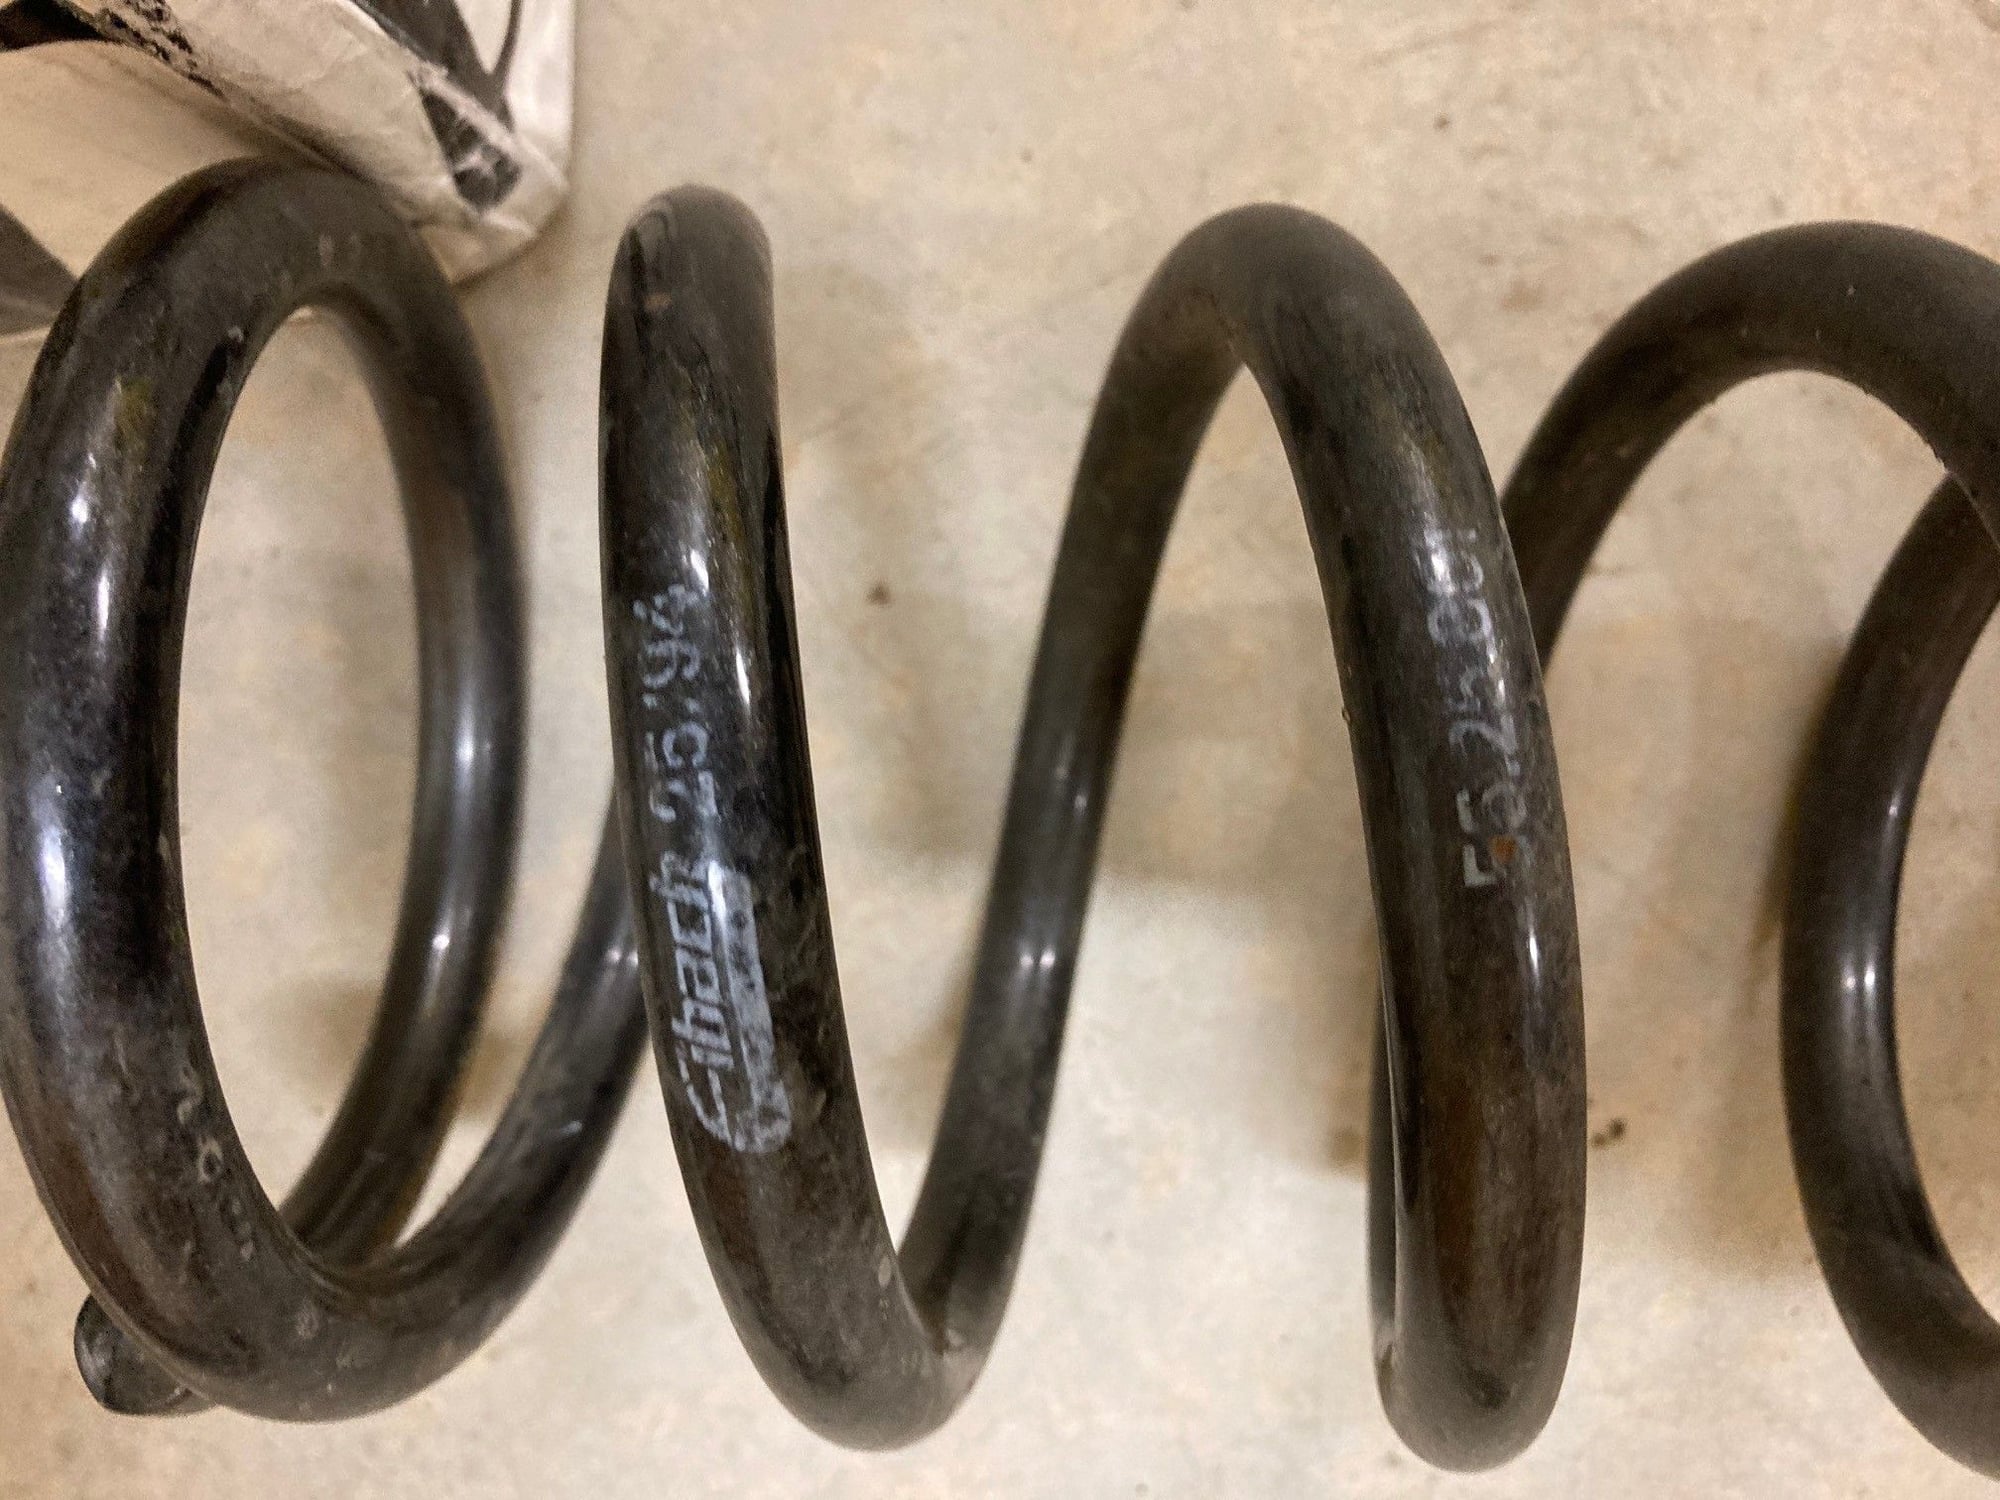 Steering/Suspension - KYB GR2 shocks and Eibach springs - Used - 1993 to 2002 Mazda RX-7 - Eugene, OR 97404, United States